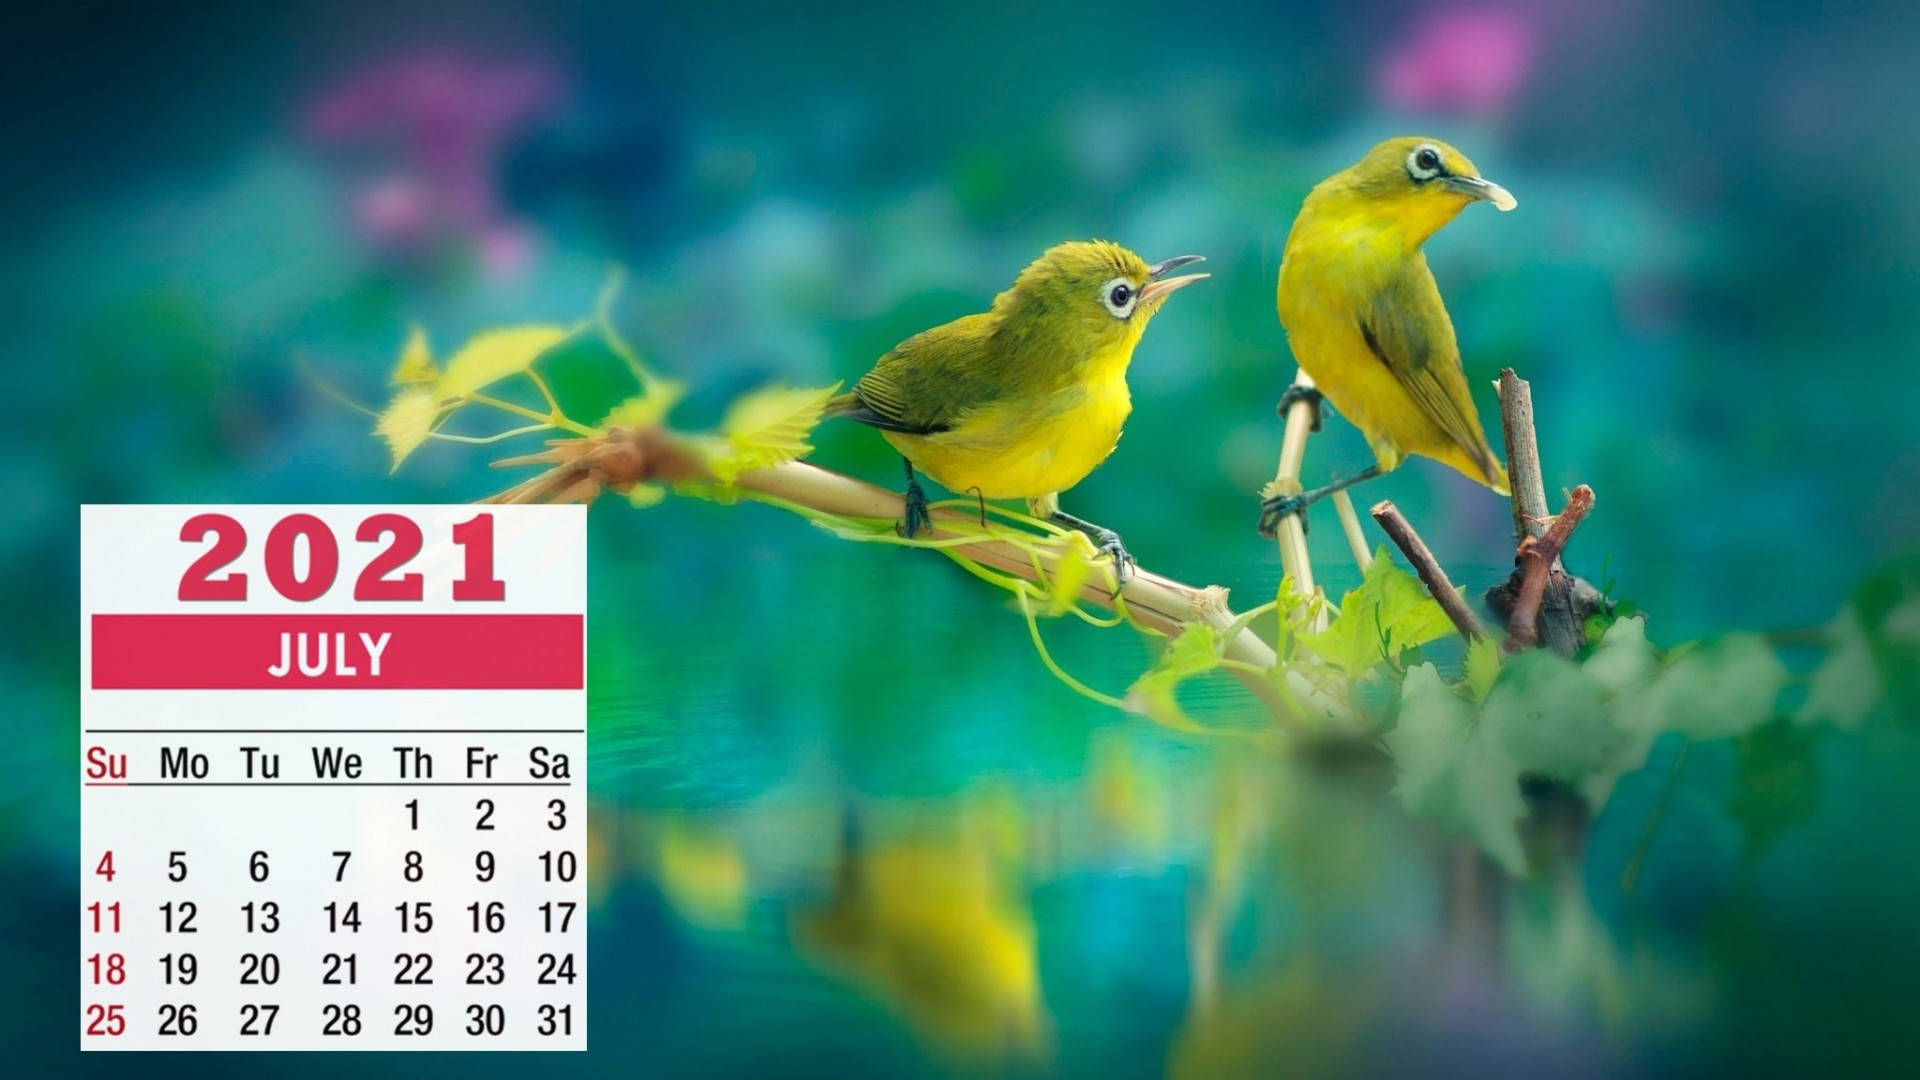 Welcome The Arrival Of July With Two Vibrant Green Birds